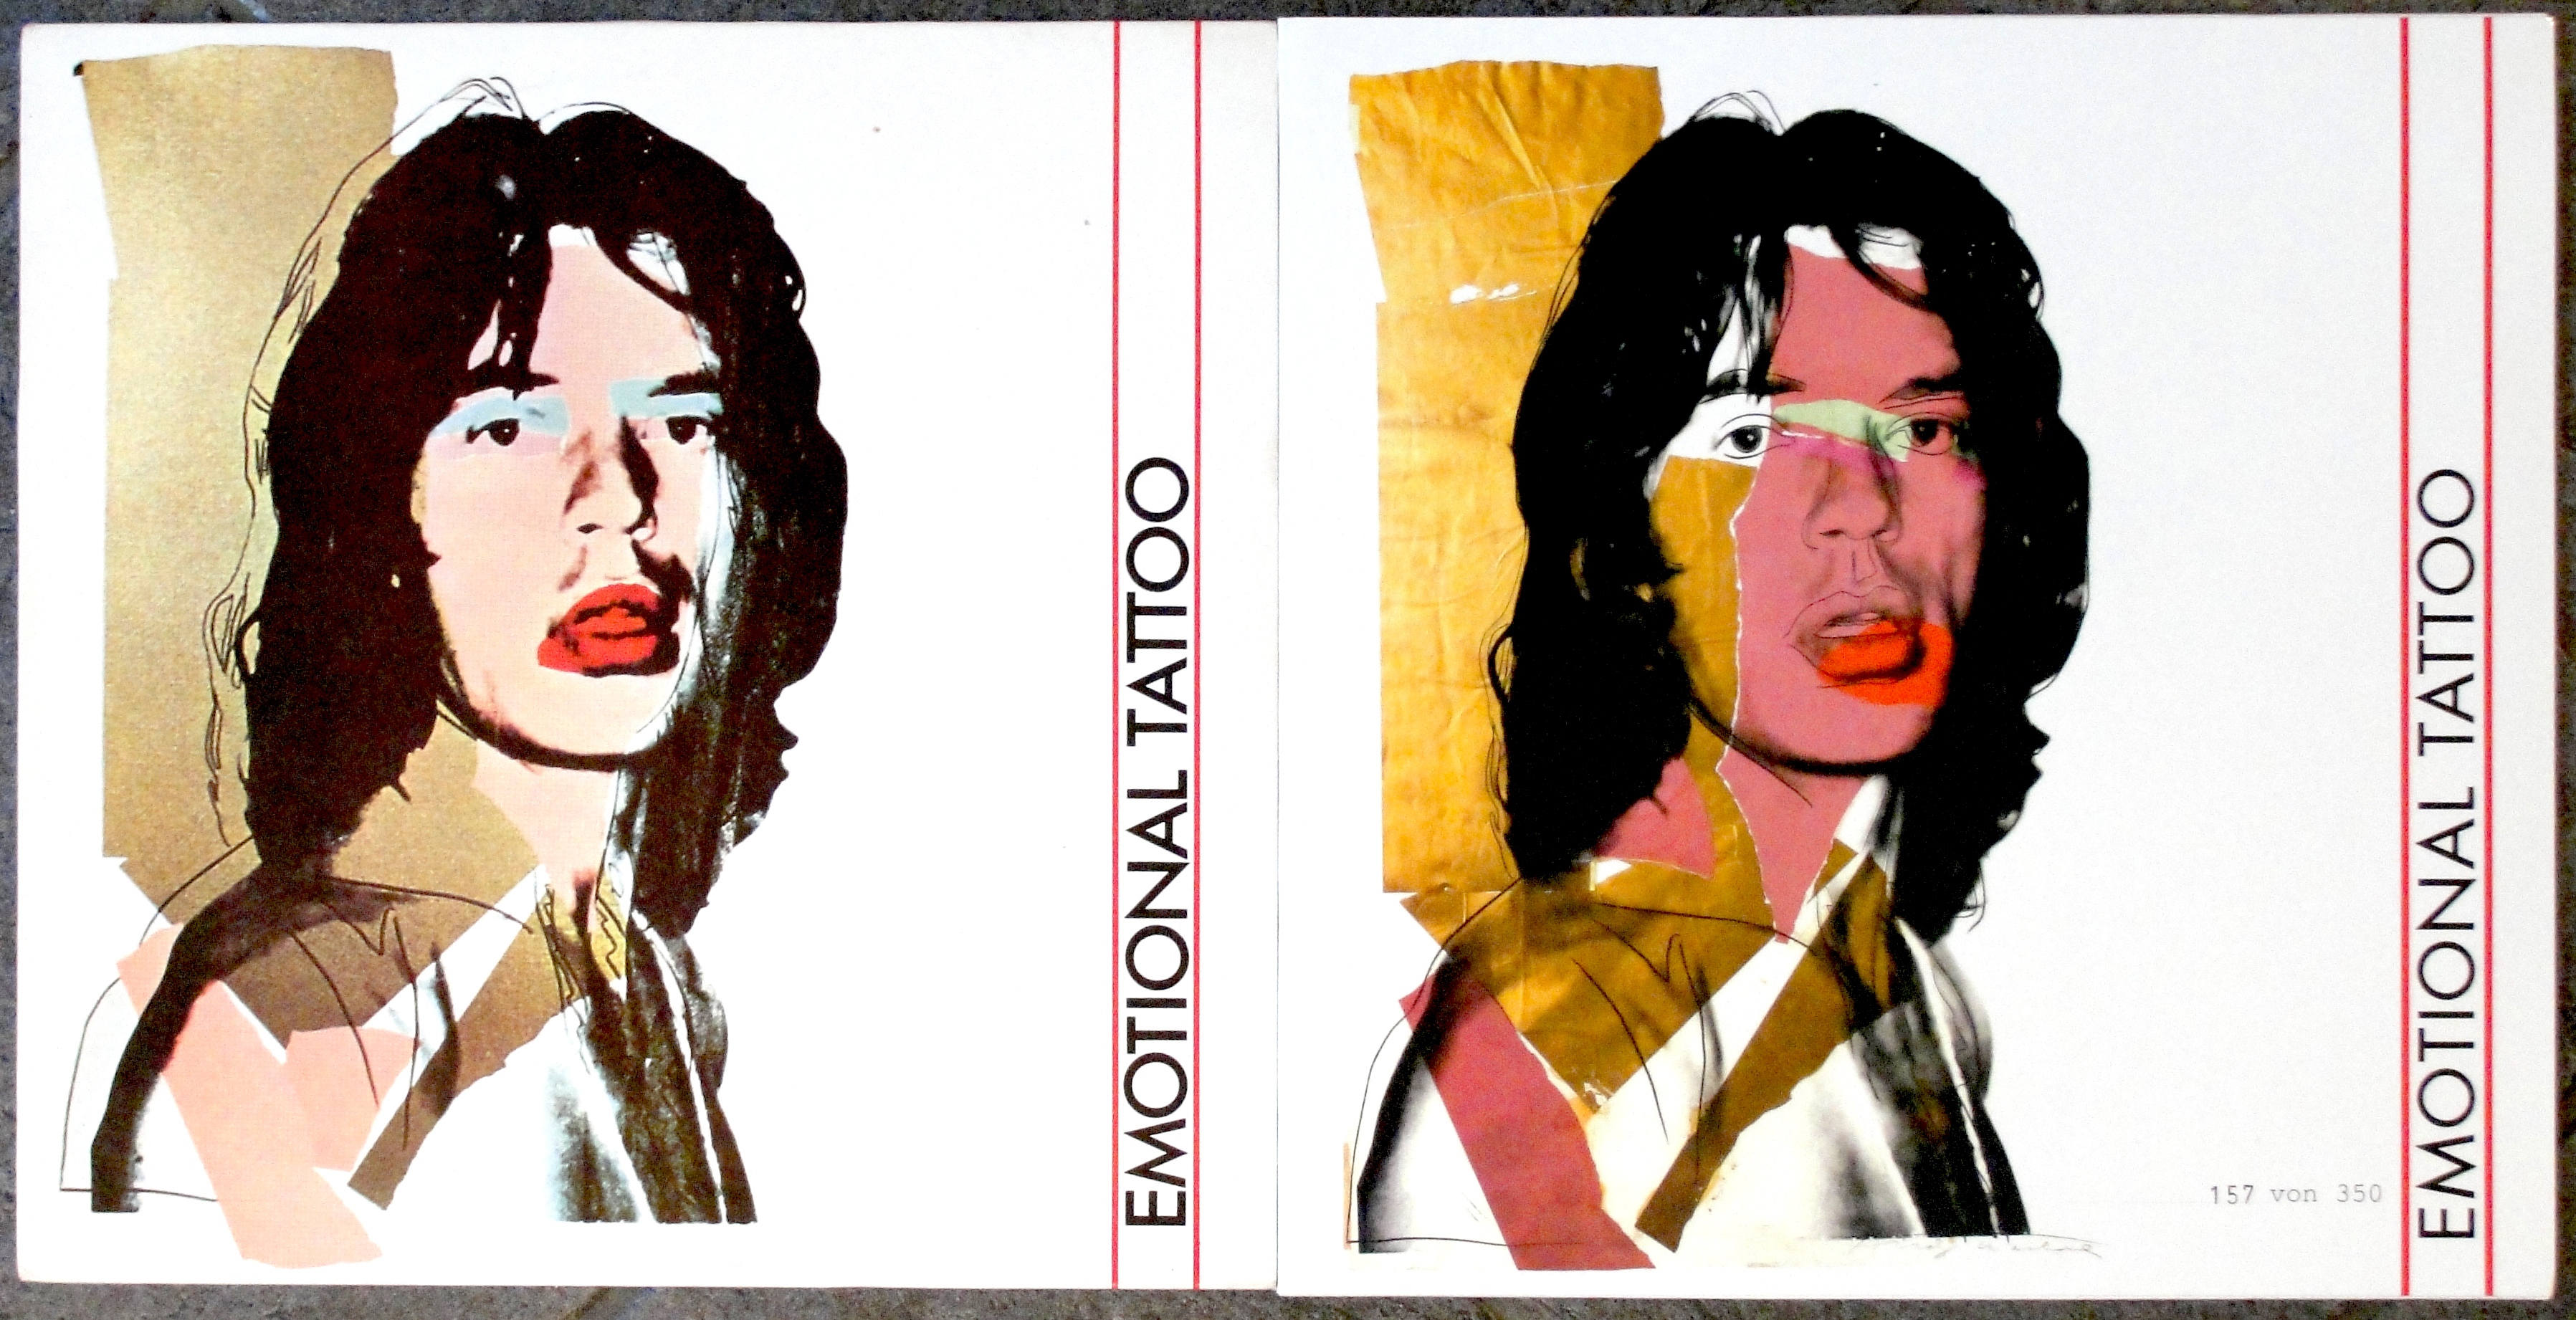 The Sources of Andy Warhol's record cover art, Part 1 – The 1975 portraits of Mick Jagger